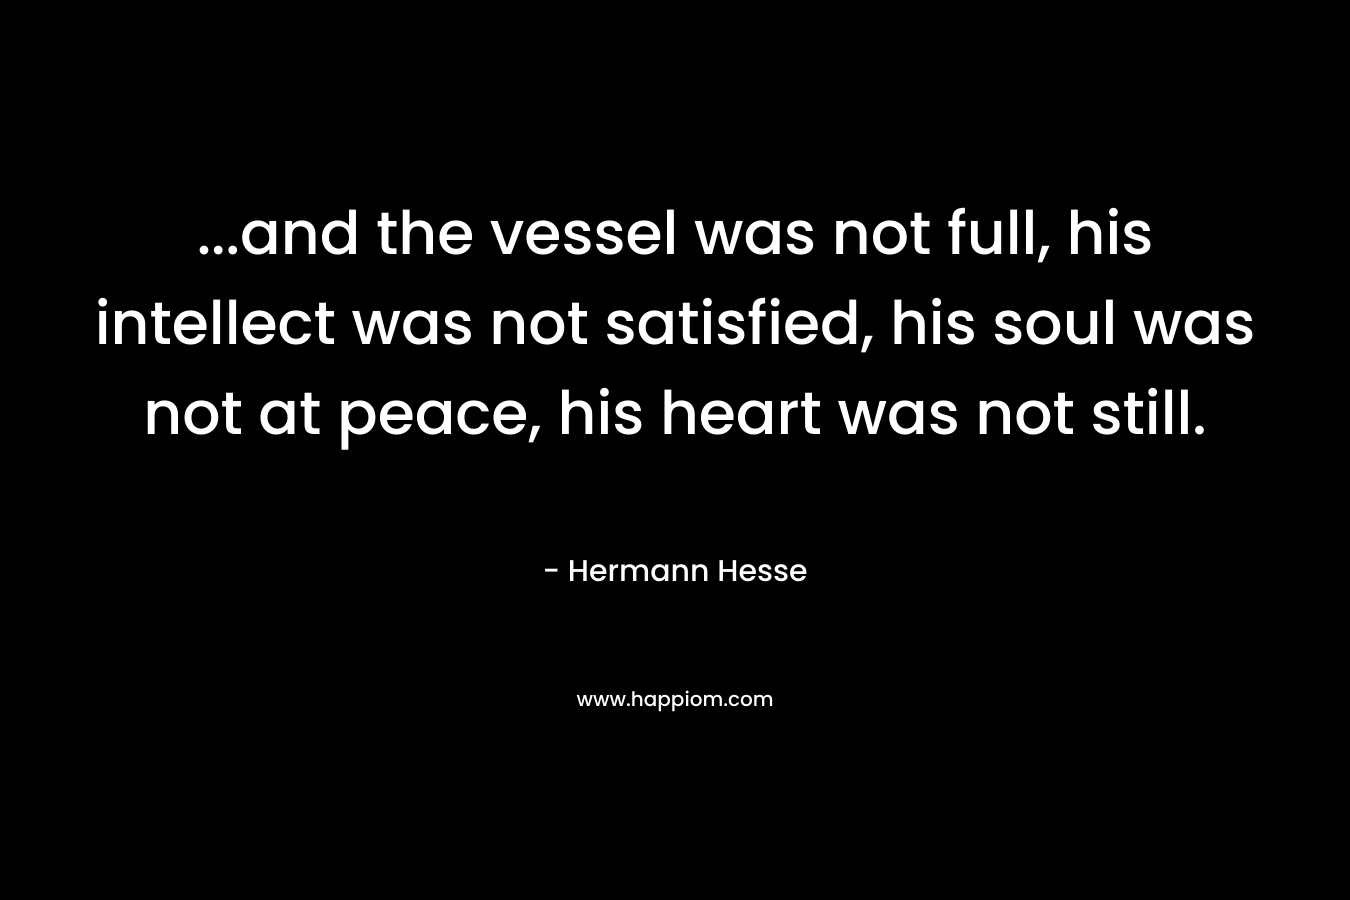 ...and the vessel was not full, his intellect was not satisfied, his soul was not at peace, his heart was not still.